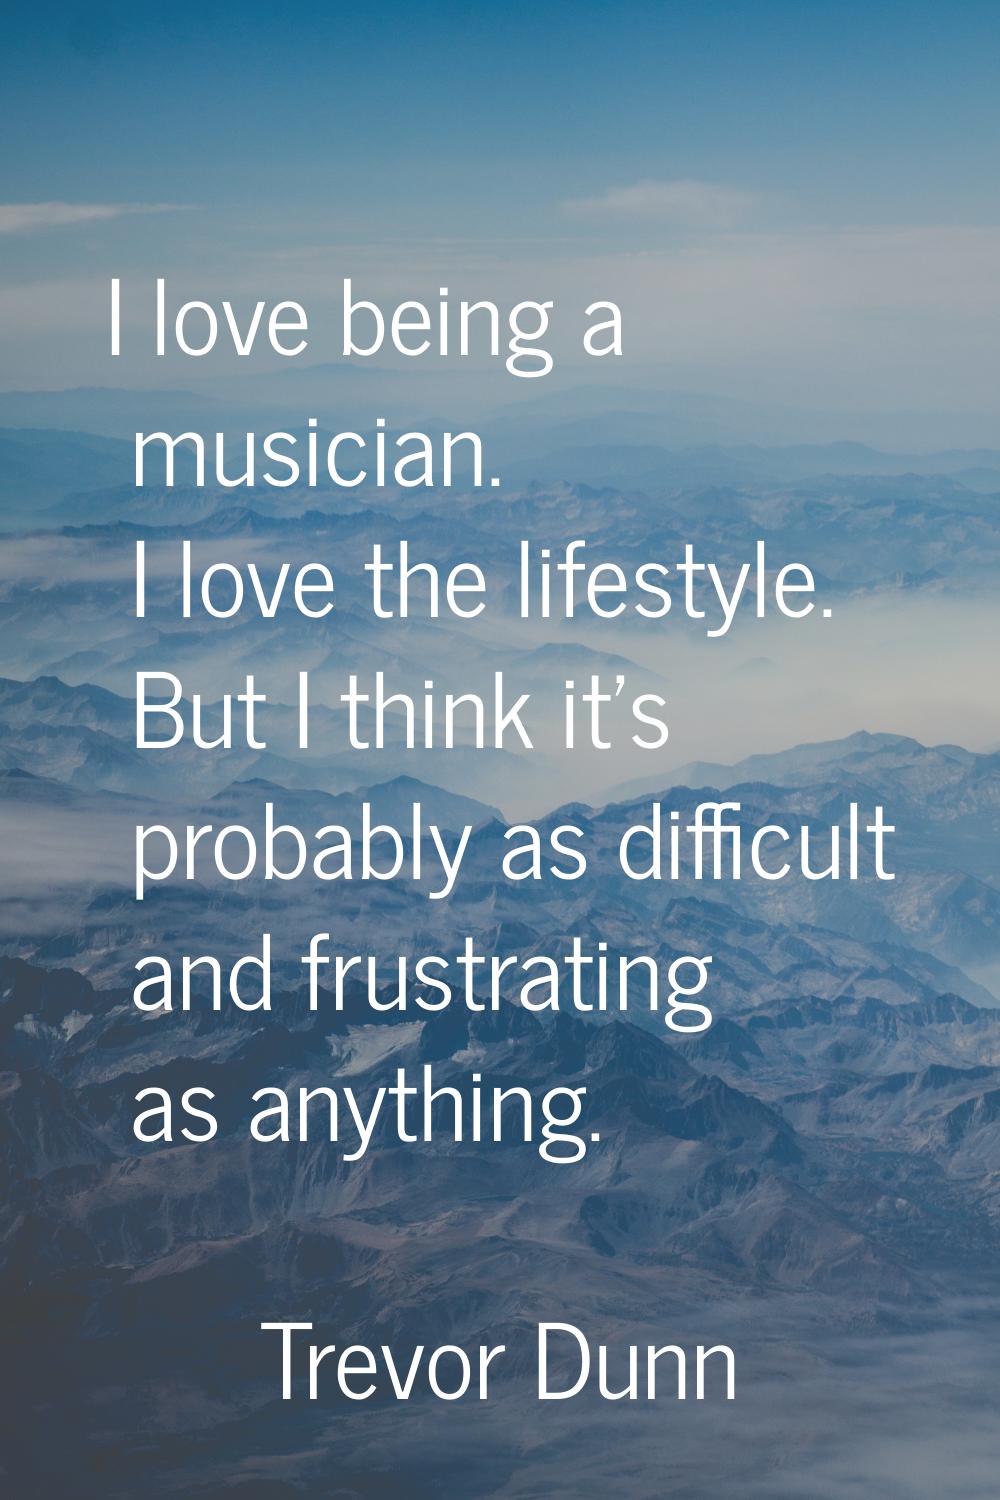 I love being a musician. I love the lifestyle. But I think it's probably as difficult and frustrati